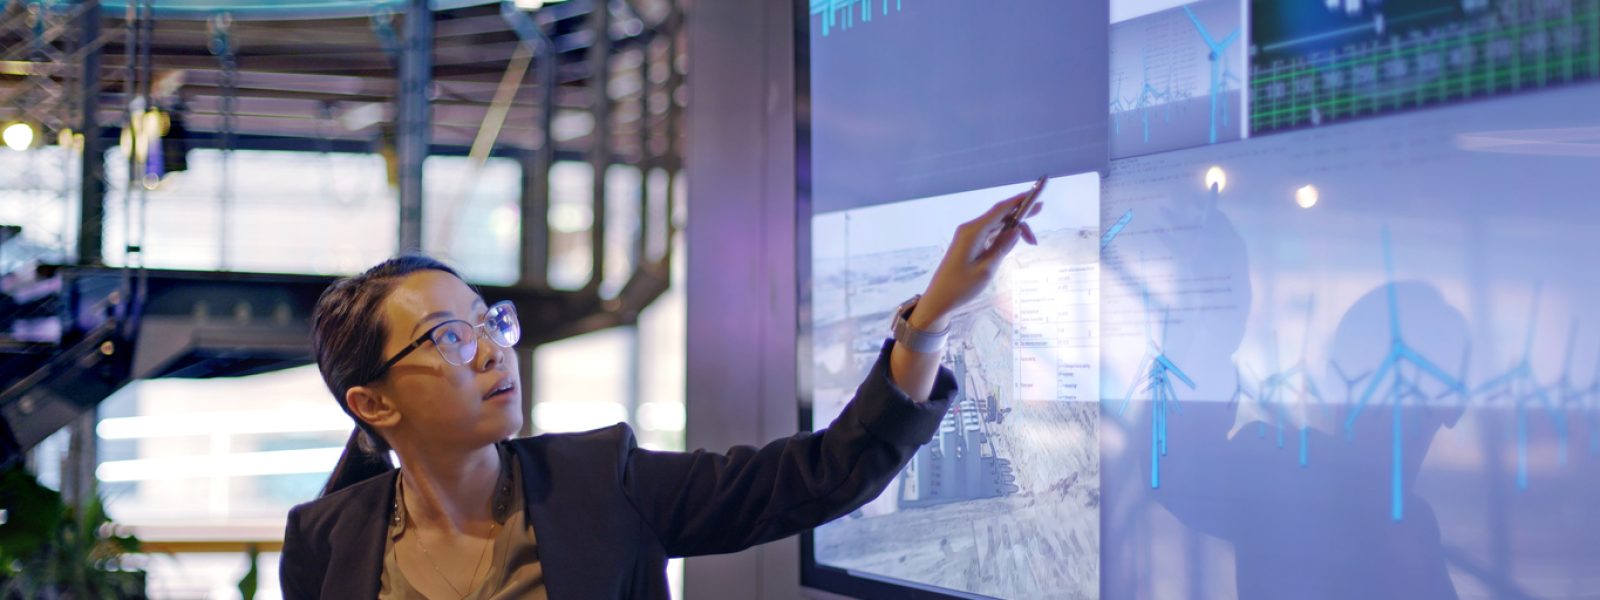 Stock photograph of a young Asian woman conducting a seminar / lecture with the aid of a large screen. The screen is displaying data & designs concerning low carbon electricity production with solar panels & wind turbines. These are juxtaposed with an image of conventional fossil fuel oil production.